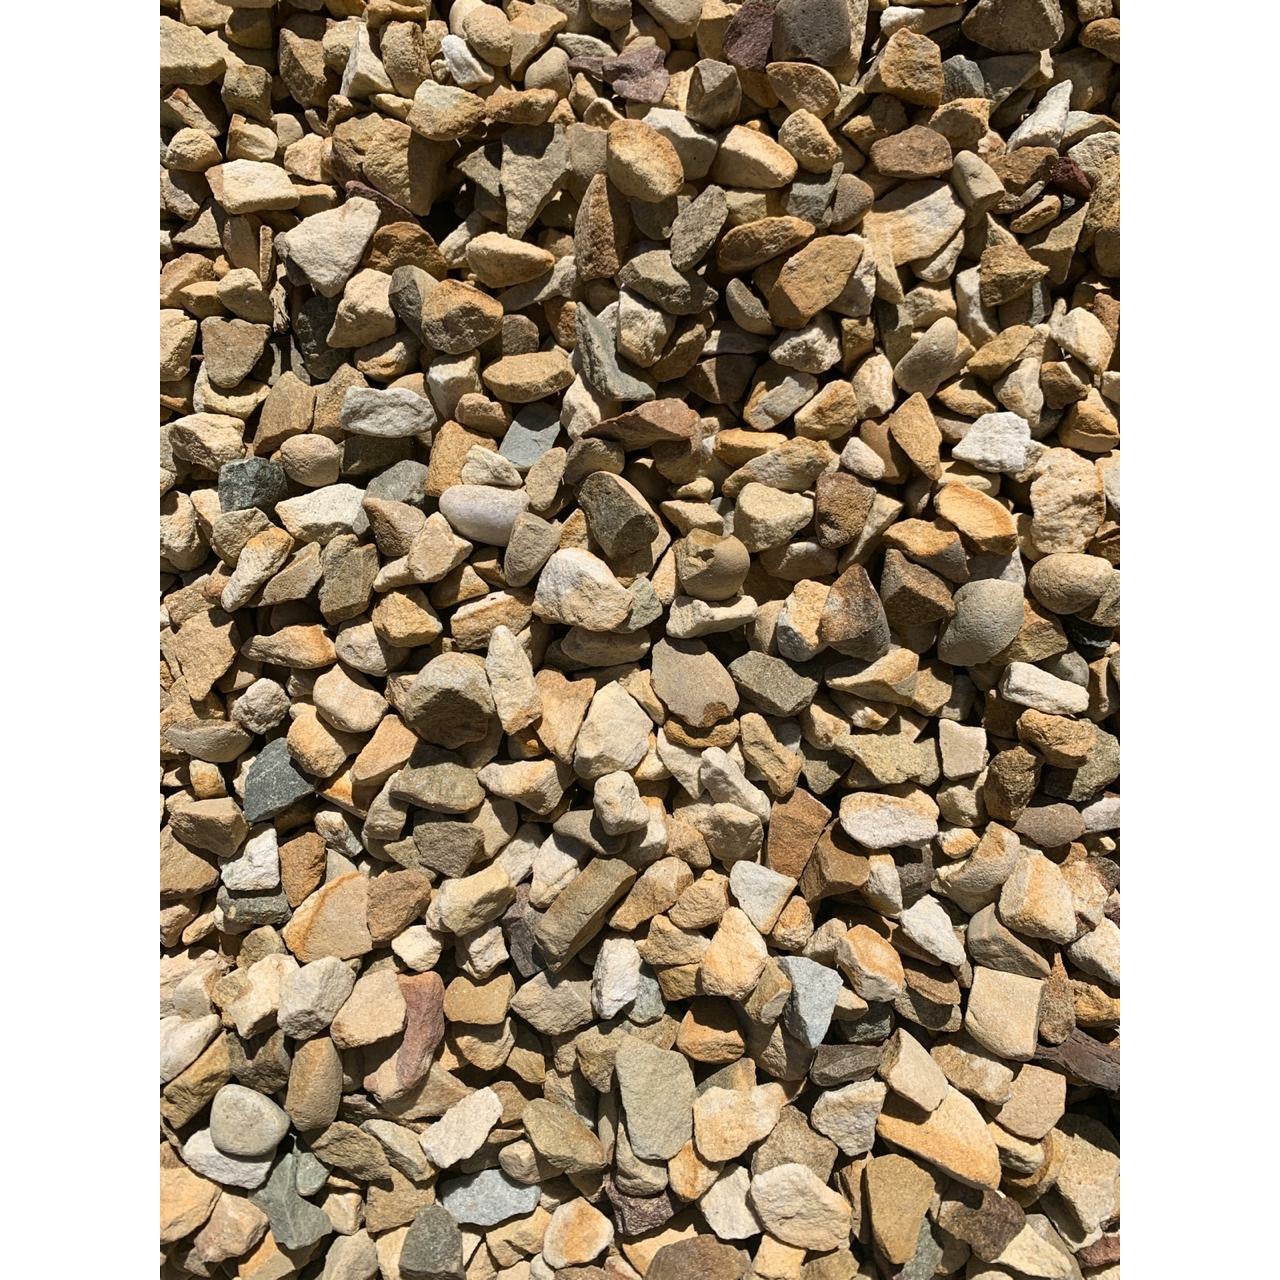 19MM Brown Crushed Stone Gravel -  8 Tons